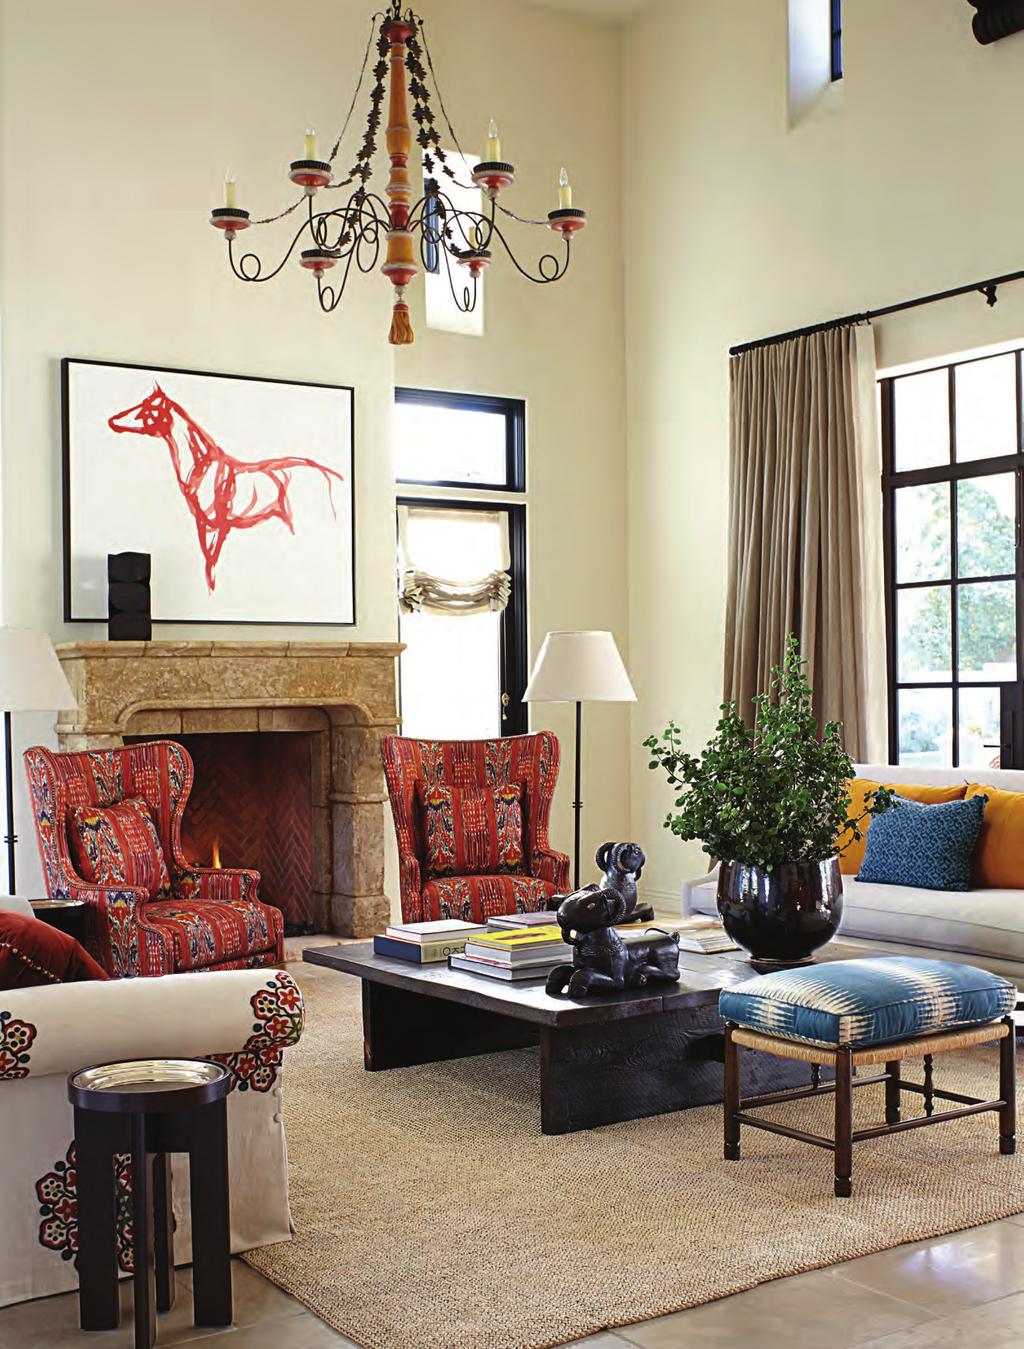 This photo: The patterned wing chairs in the great-room take their color cues from the sofa in the foreground.